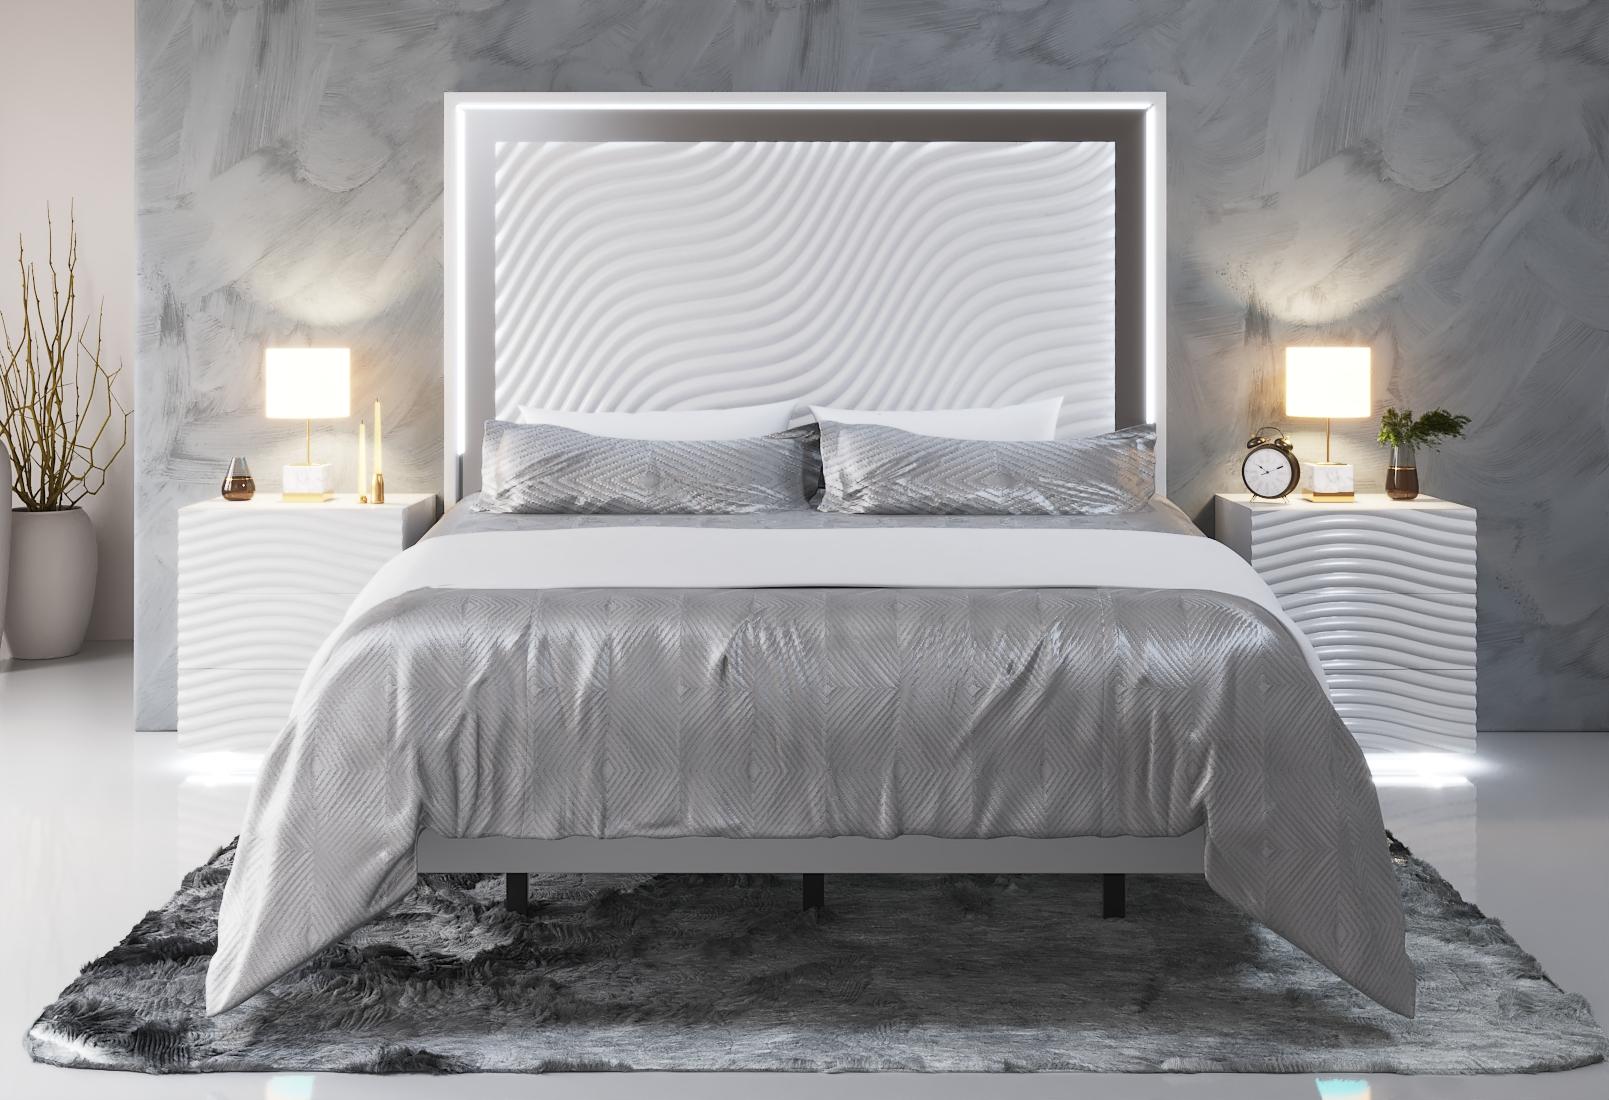 

    
Glam Shiny White King Bedroom Set 5 WAVE ESF Contemporary Modern MADE IN SPAIN
